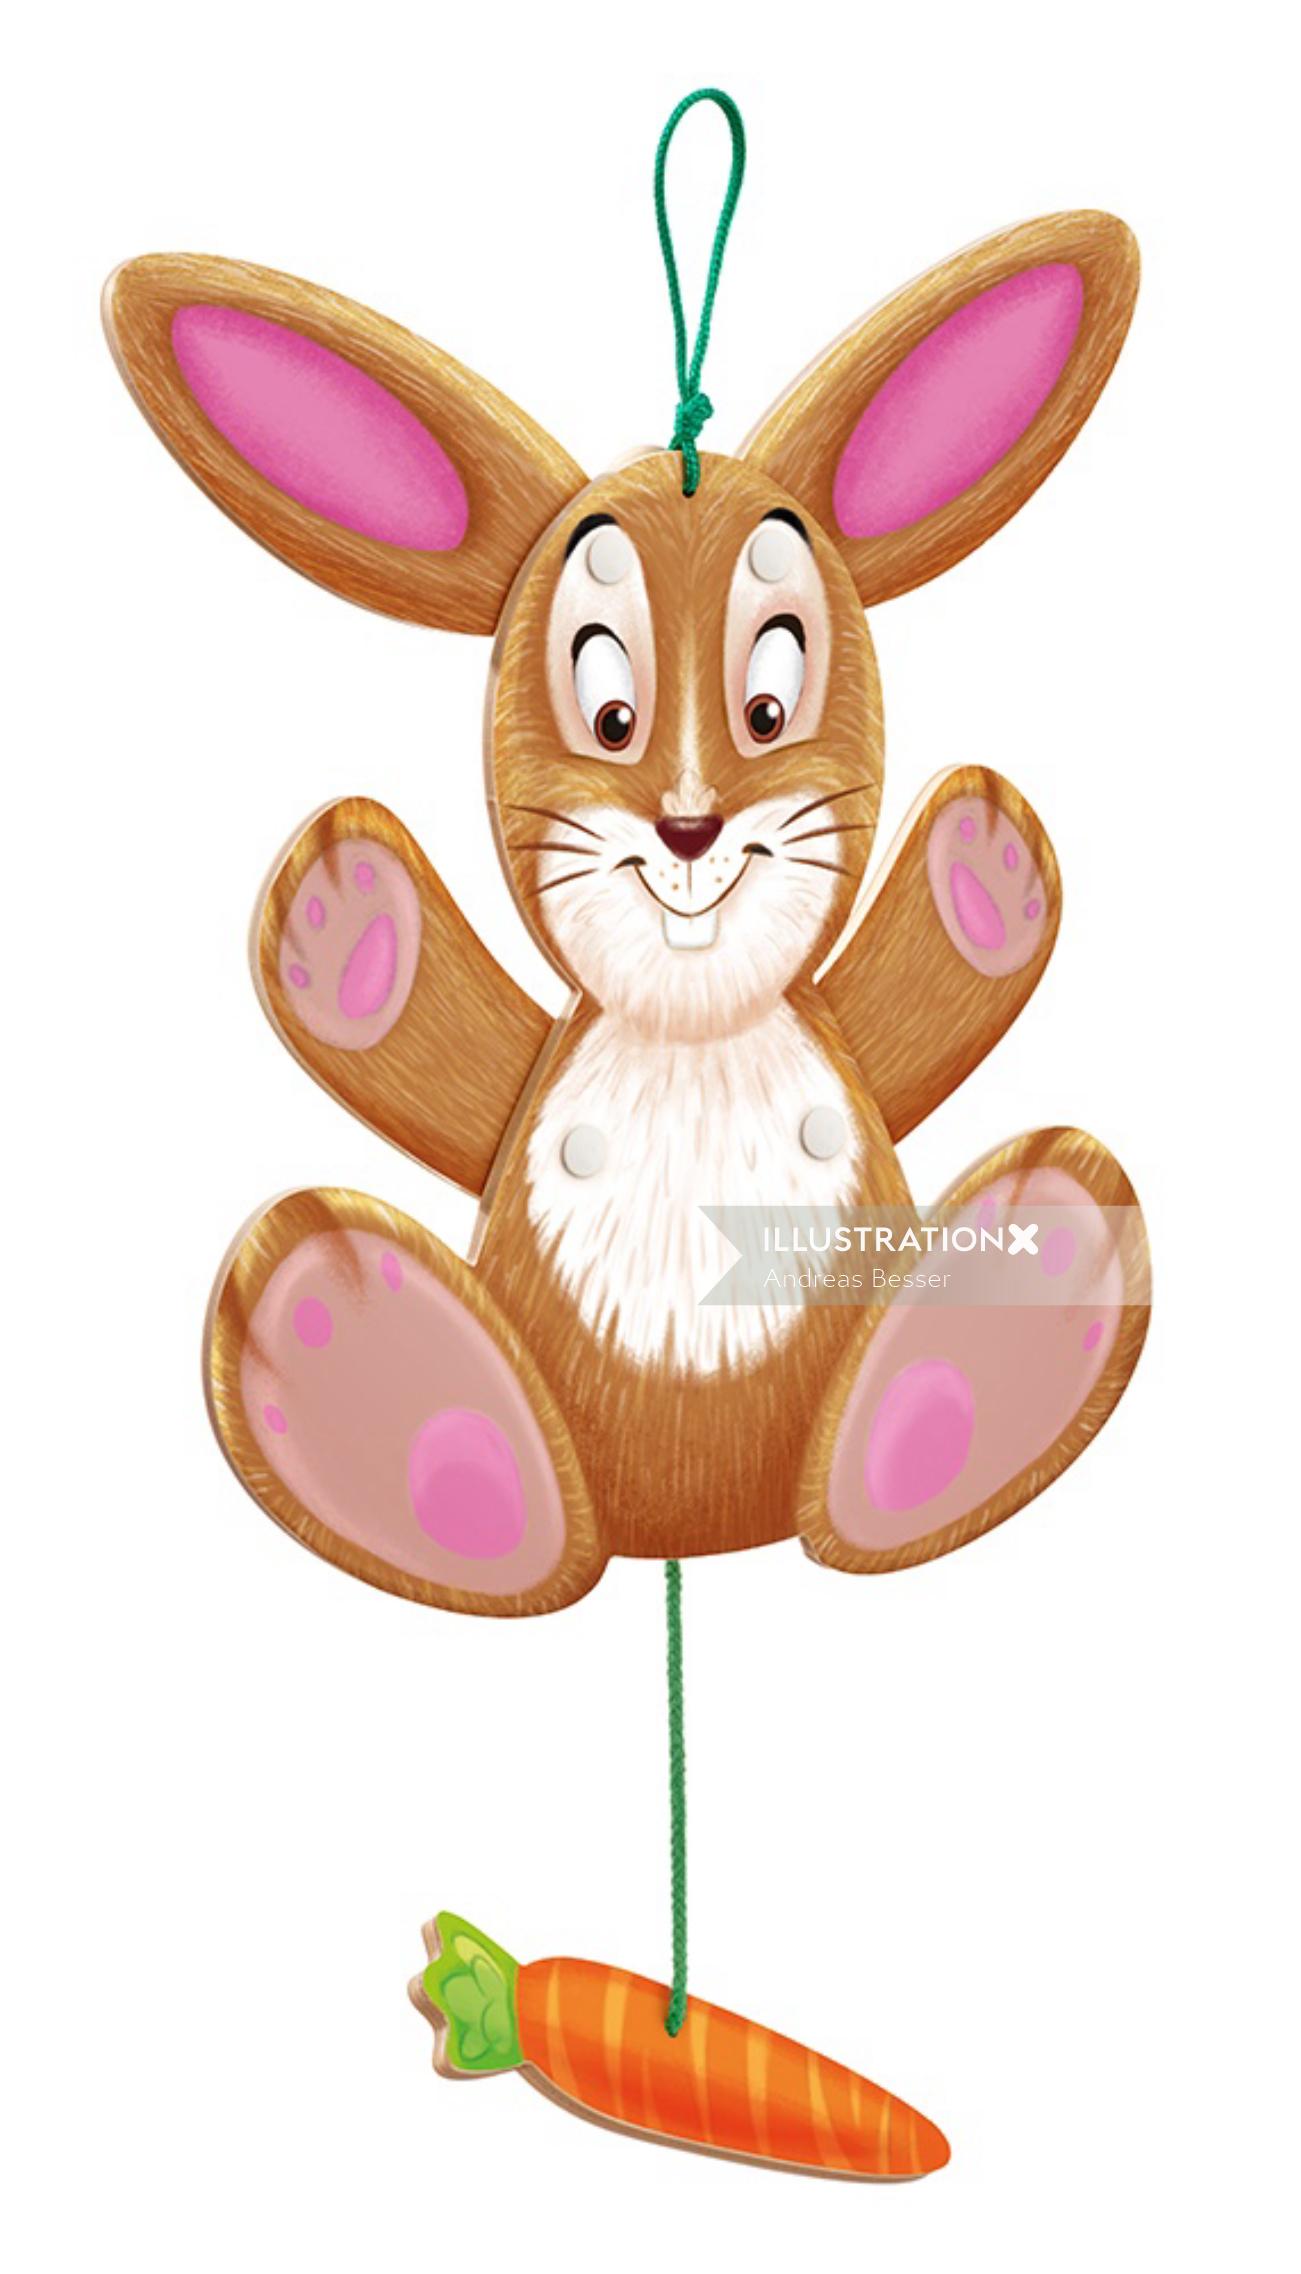 Illustration of bunny with carrot
